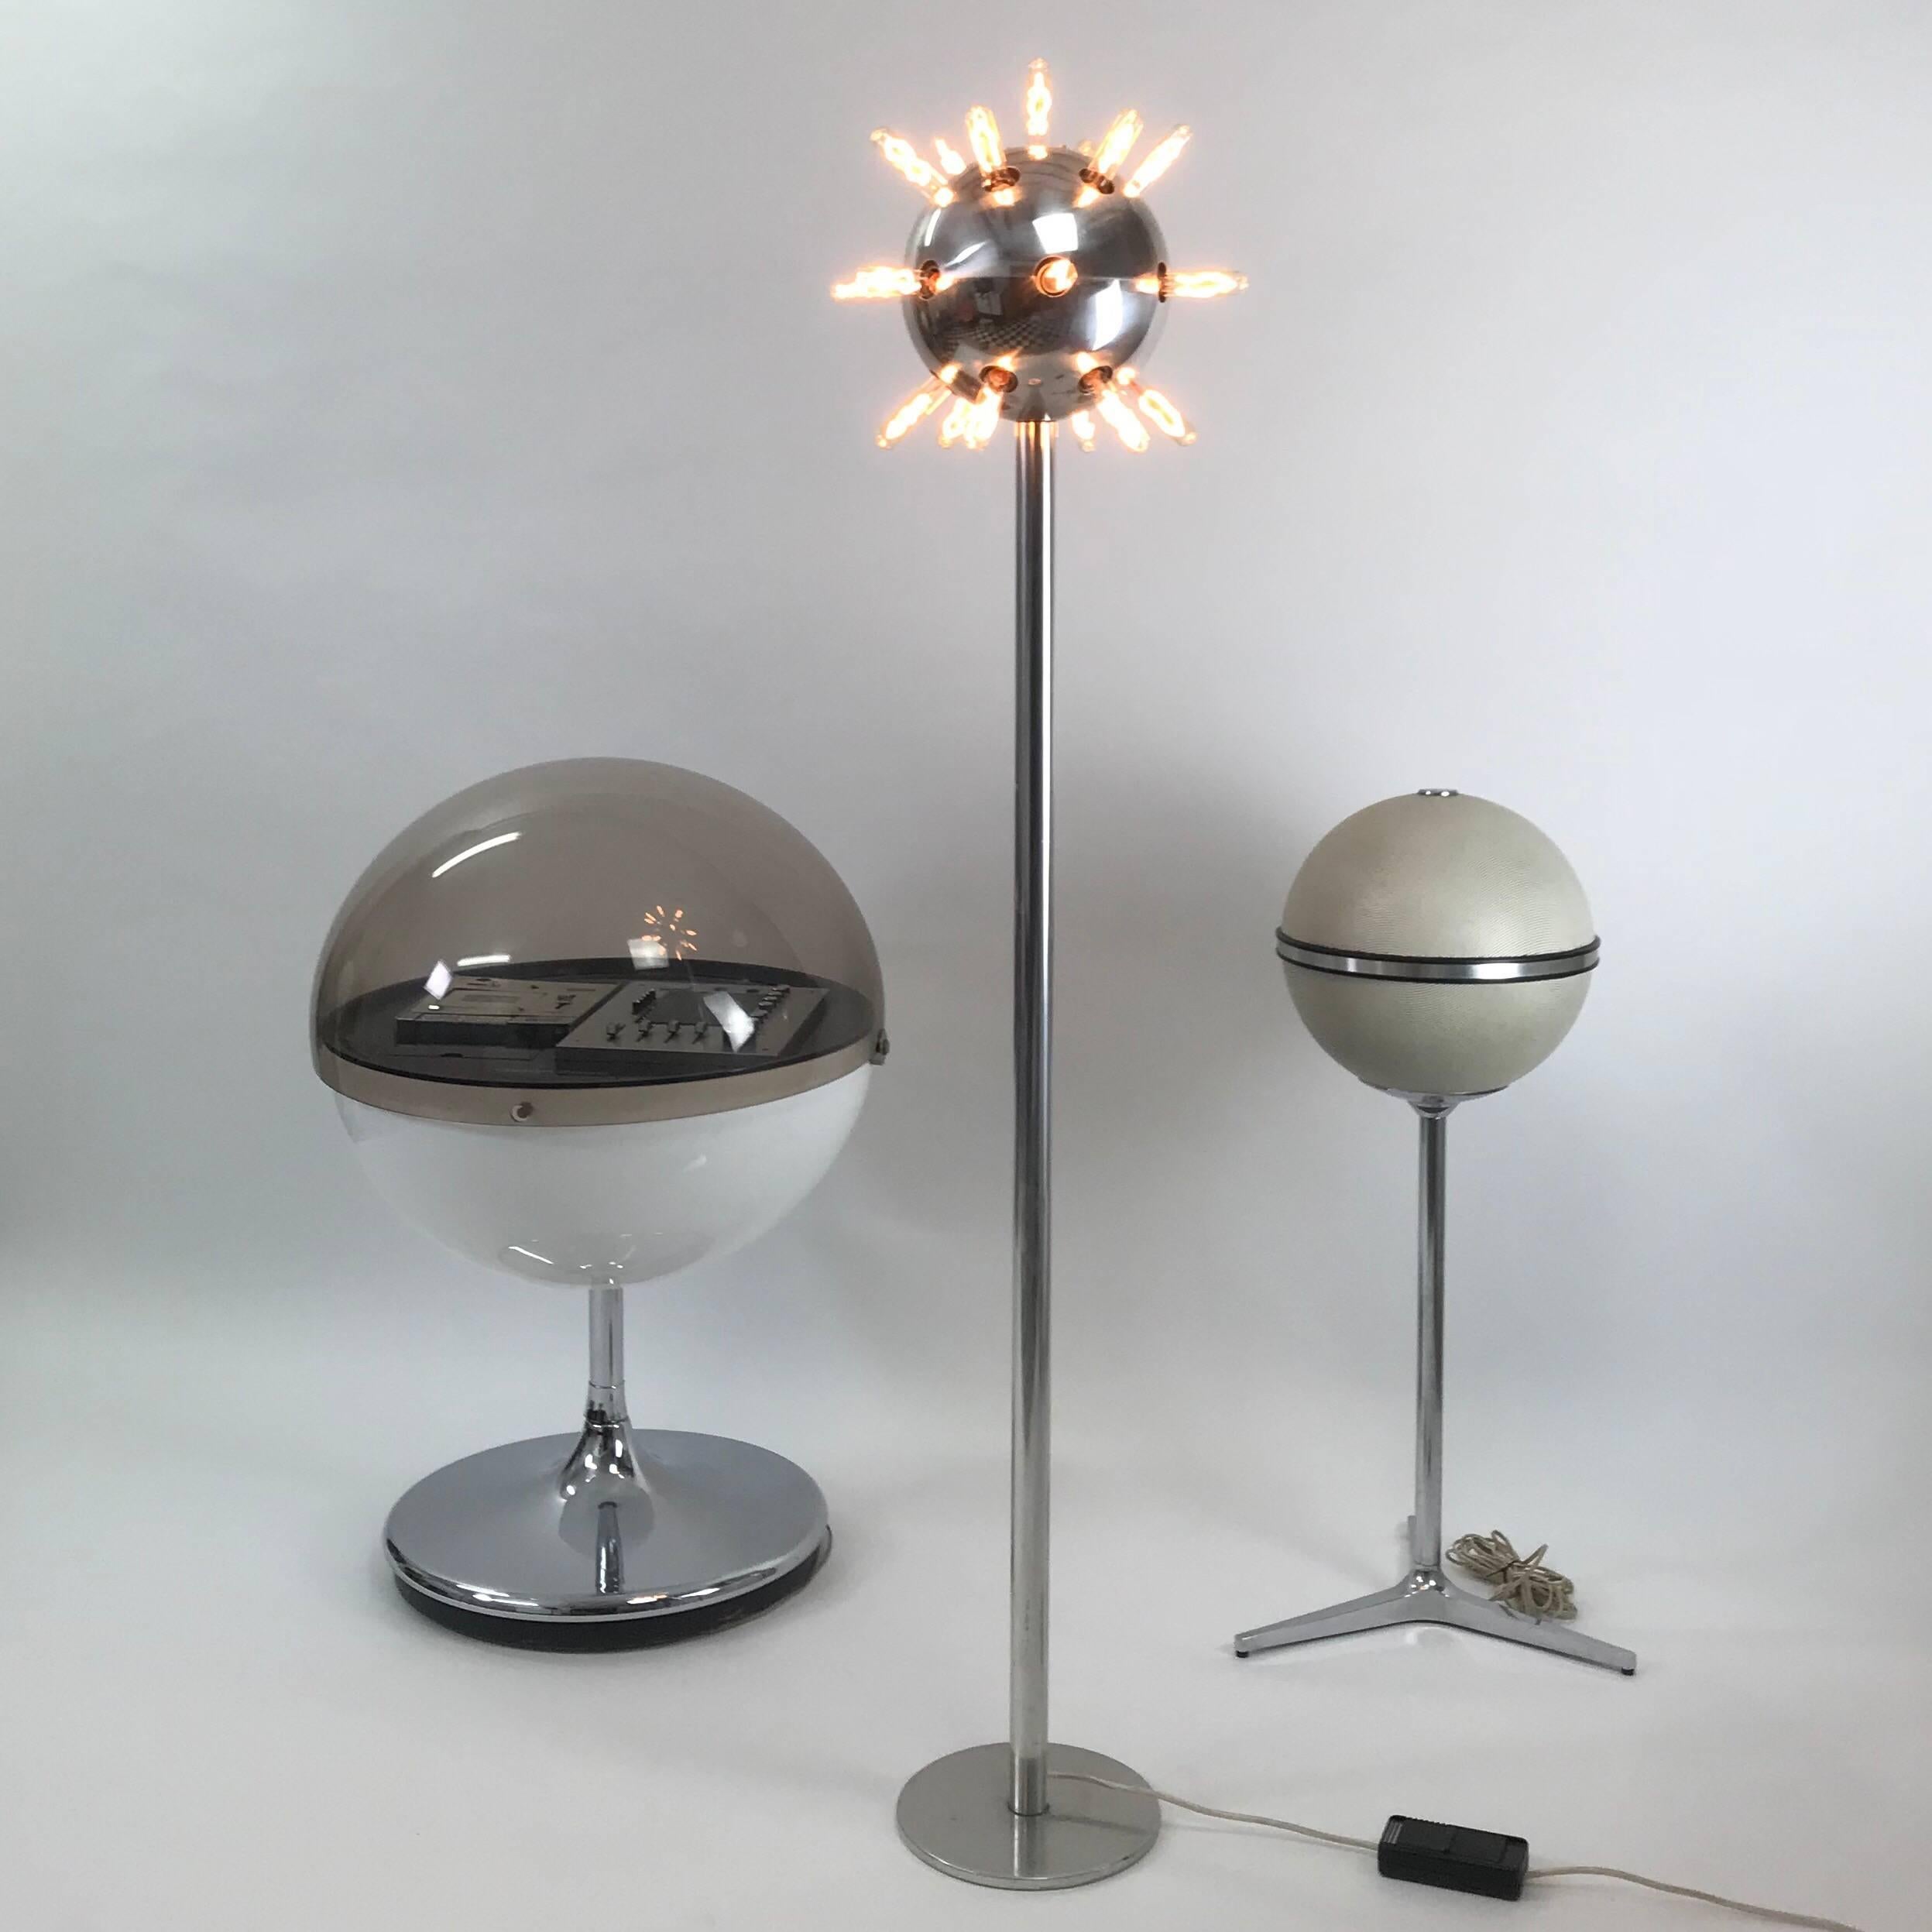 Beautiful and rare chrome floor lamp made in the late 1950s by Temde (Swiss / german) manufactor. 

The light consists of 19 E14/E12 bulb sockets placed around the the ball shaped light head.

Good vintage conditions with few age related